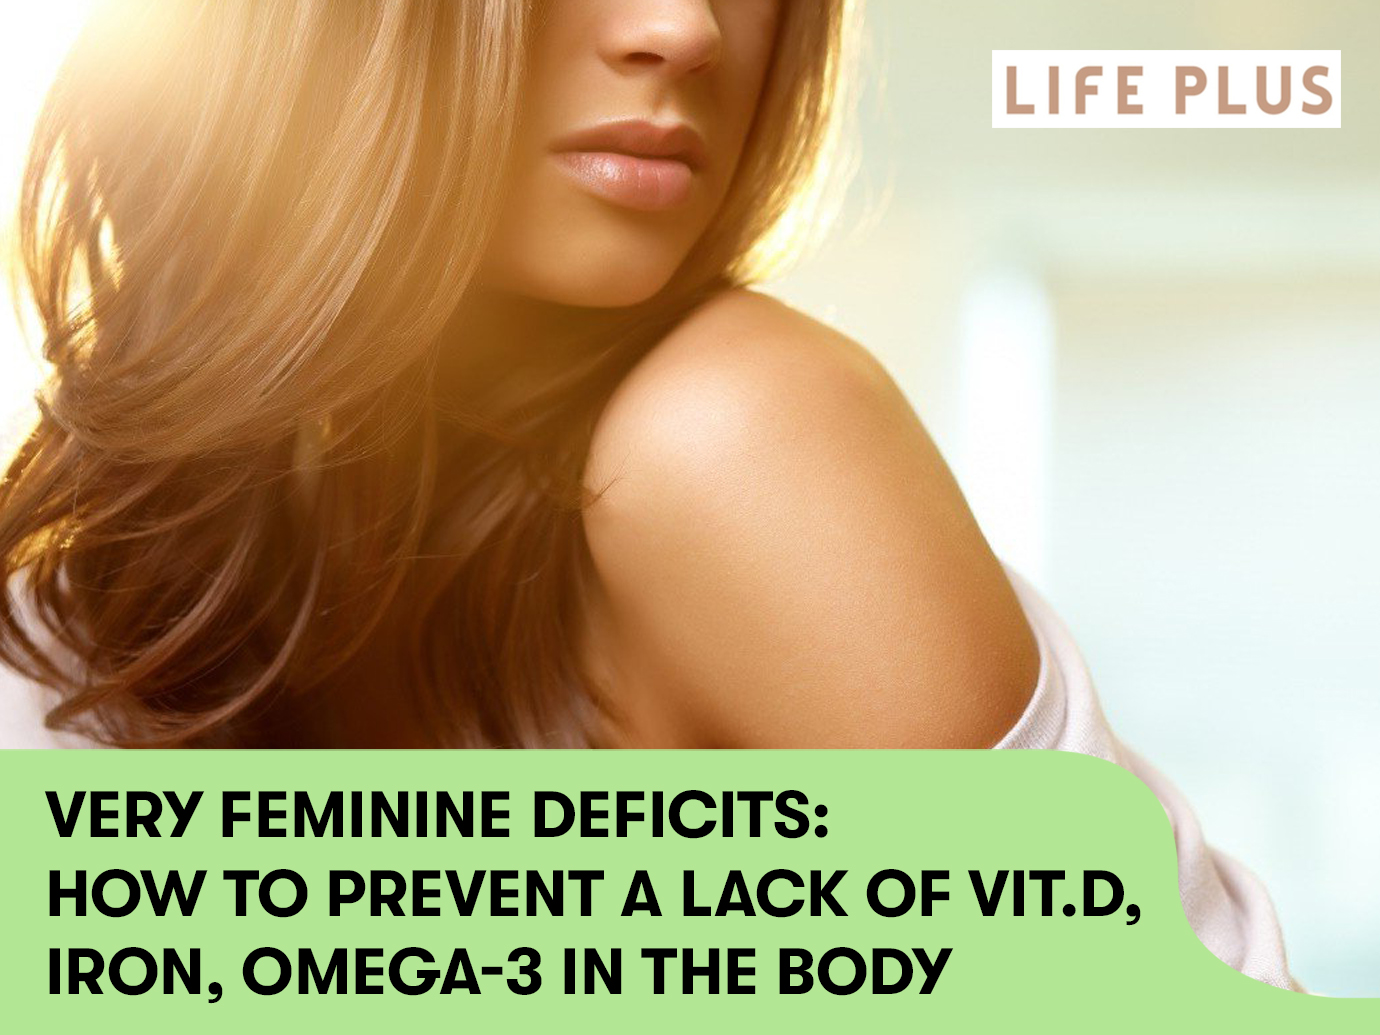 VERY FEMININE DEFICITS: how to prevent a lack of vit.D, iron, OMEGA-3 in the body